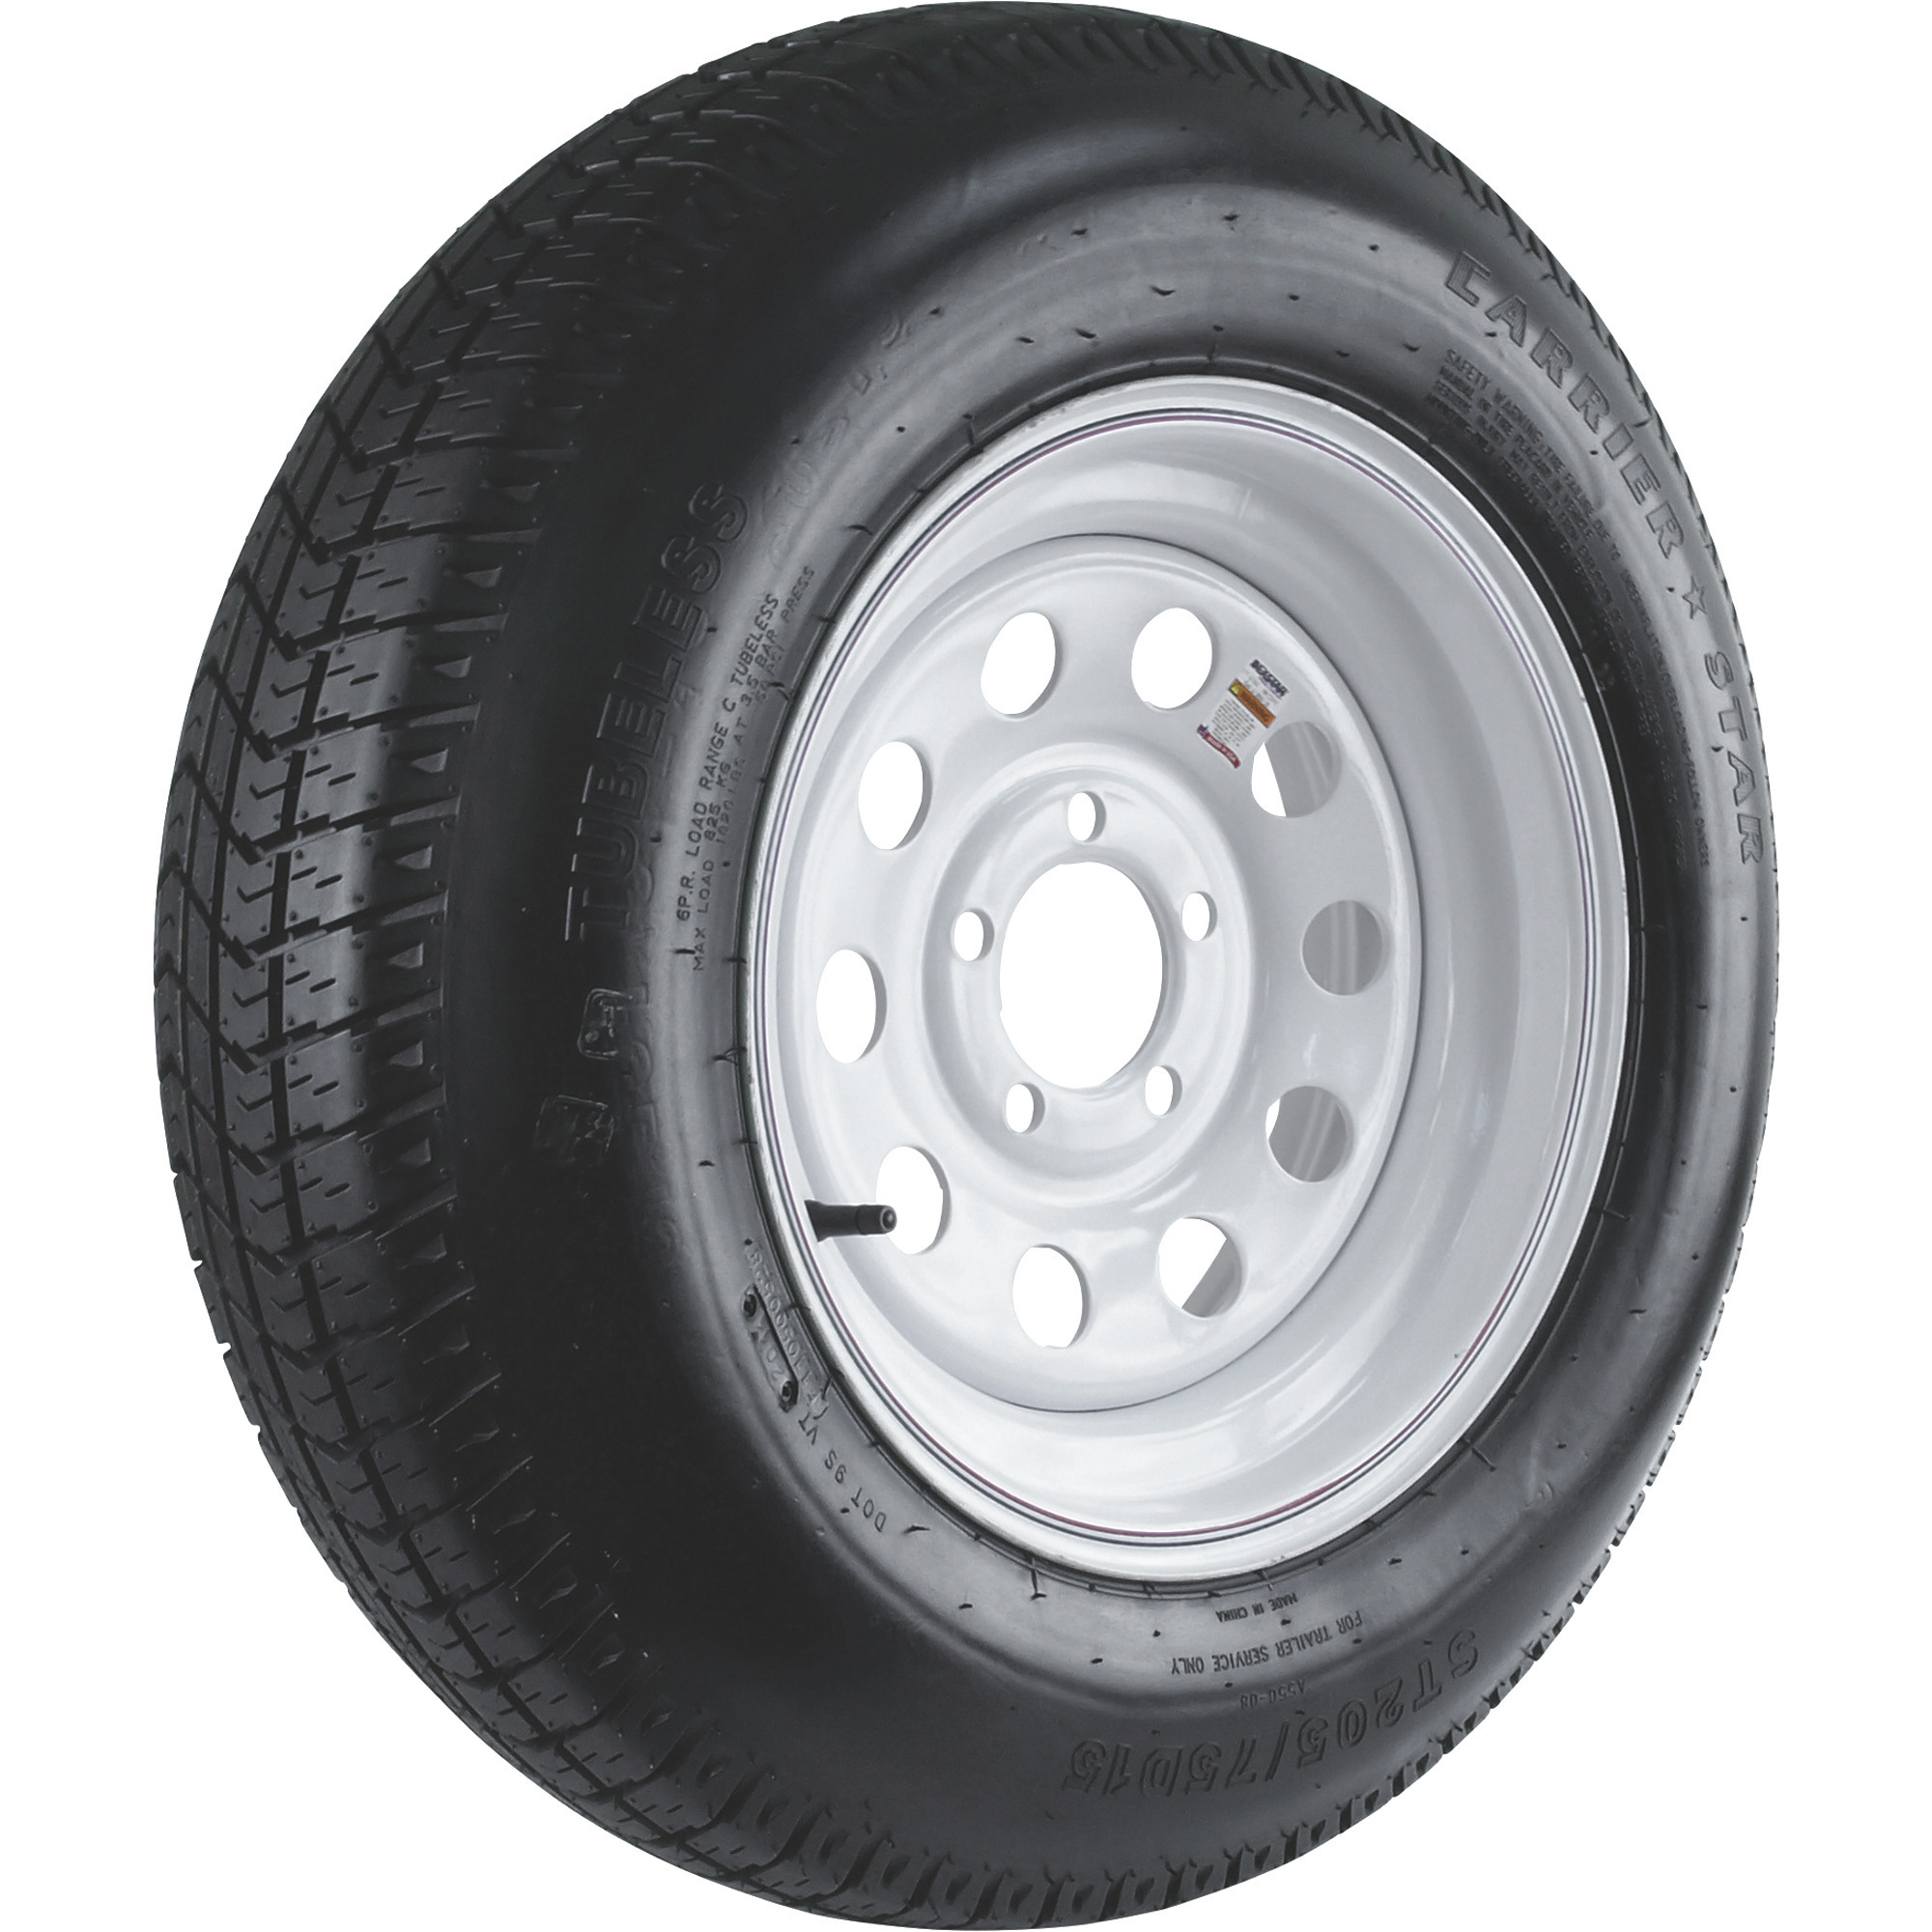 Kenda Carrier Star 15Inch Bias Ply Trailer Tire and Wheel Assembly â ST205/75D-15, 5-Hole, Load Range C, Model DM205D5C-5MMN